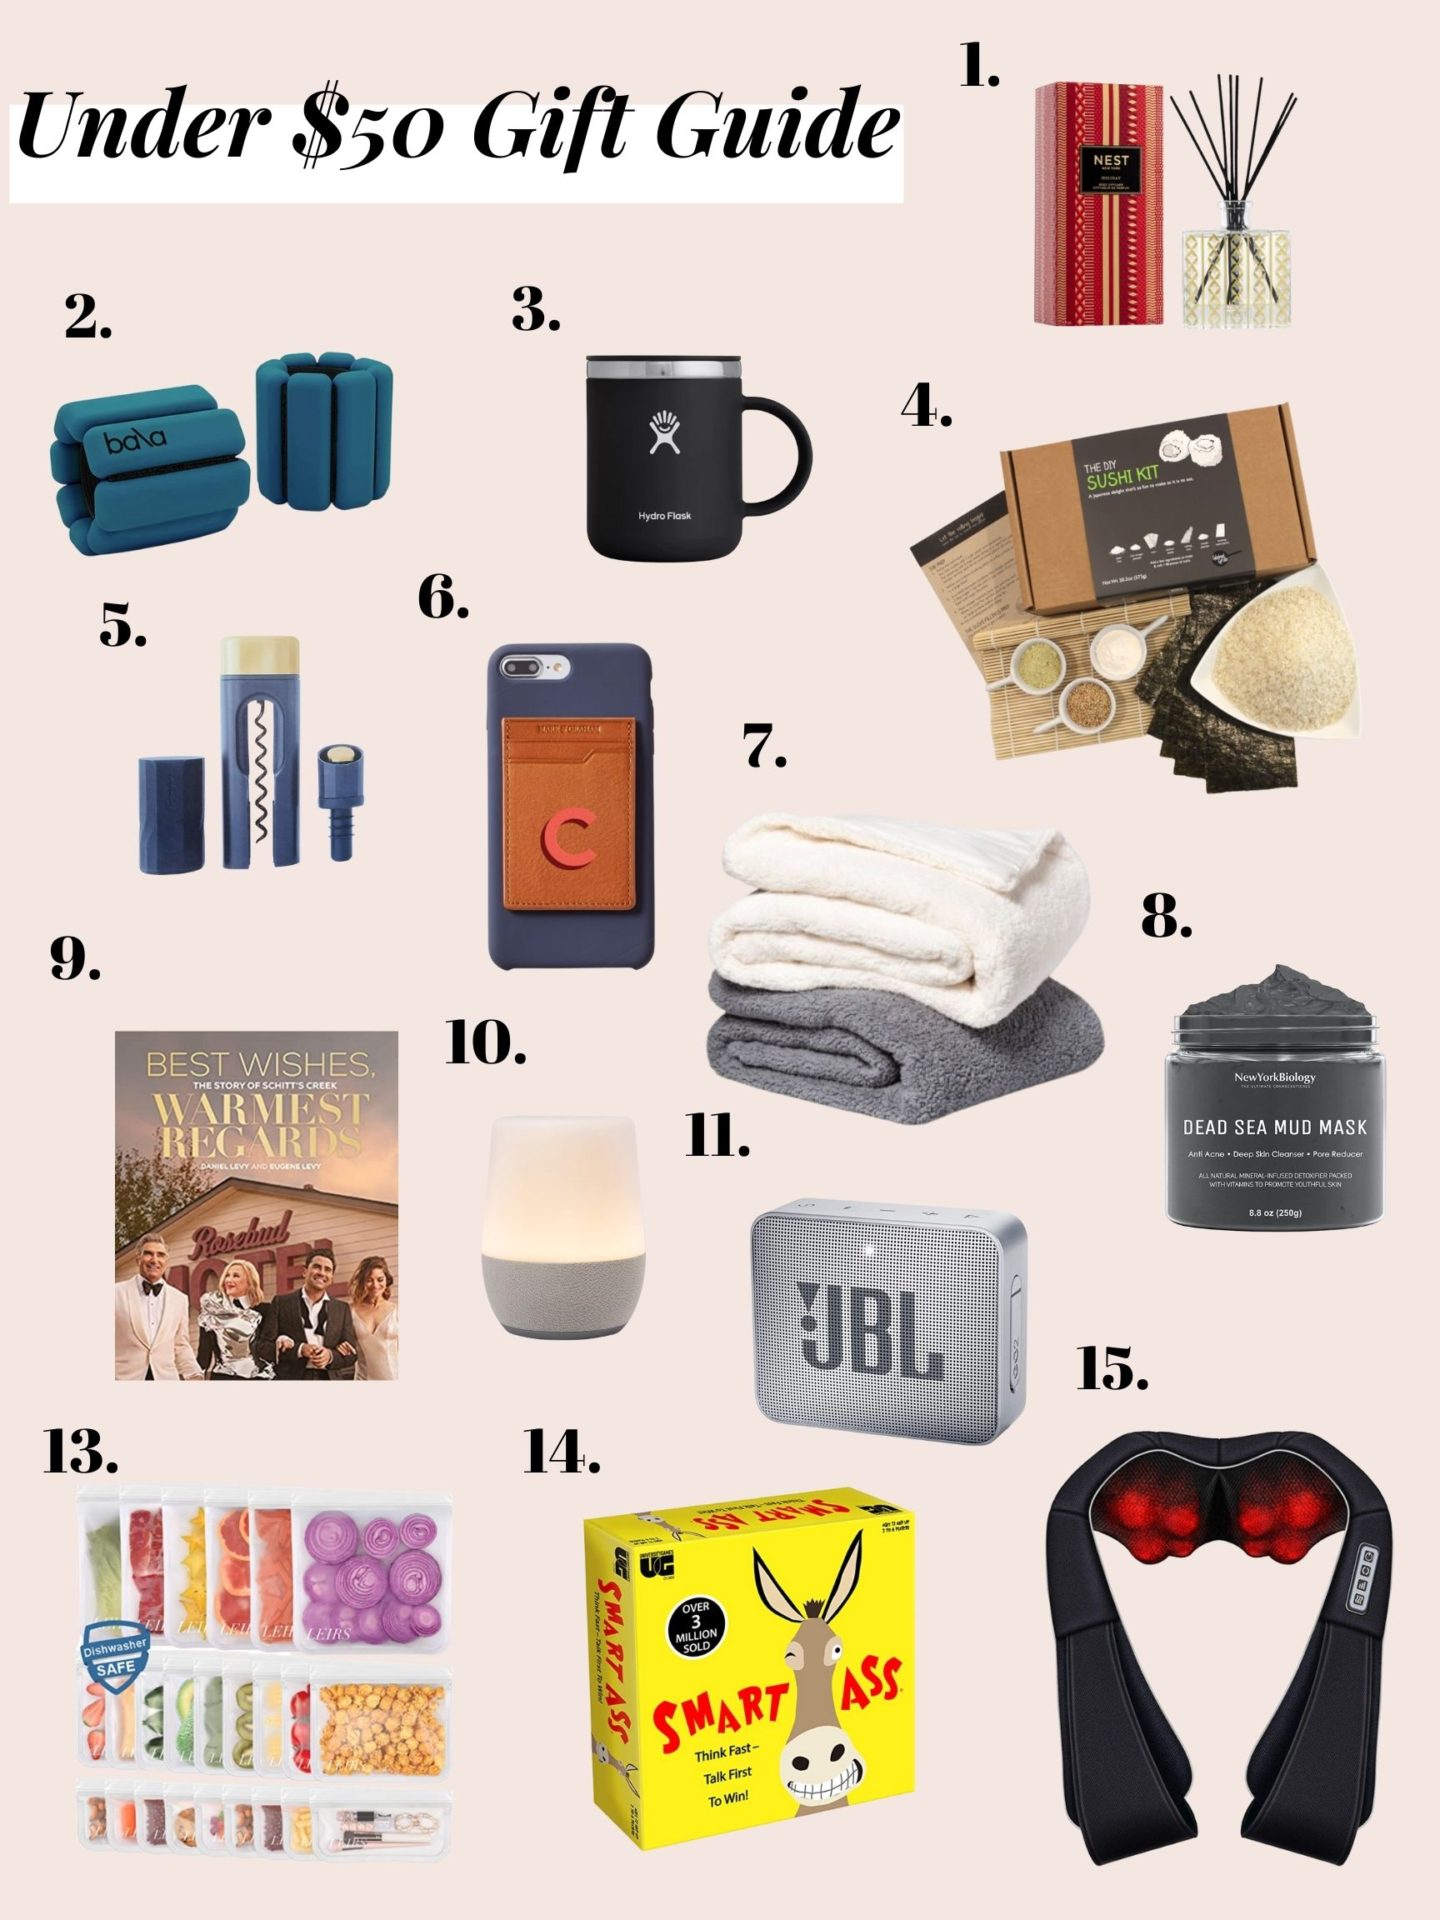 Under $50 Gift Guide